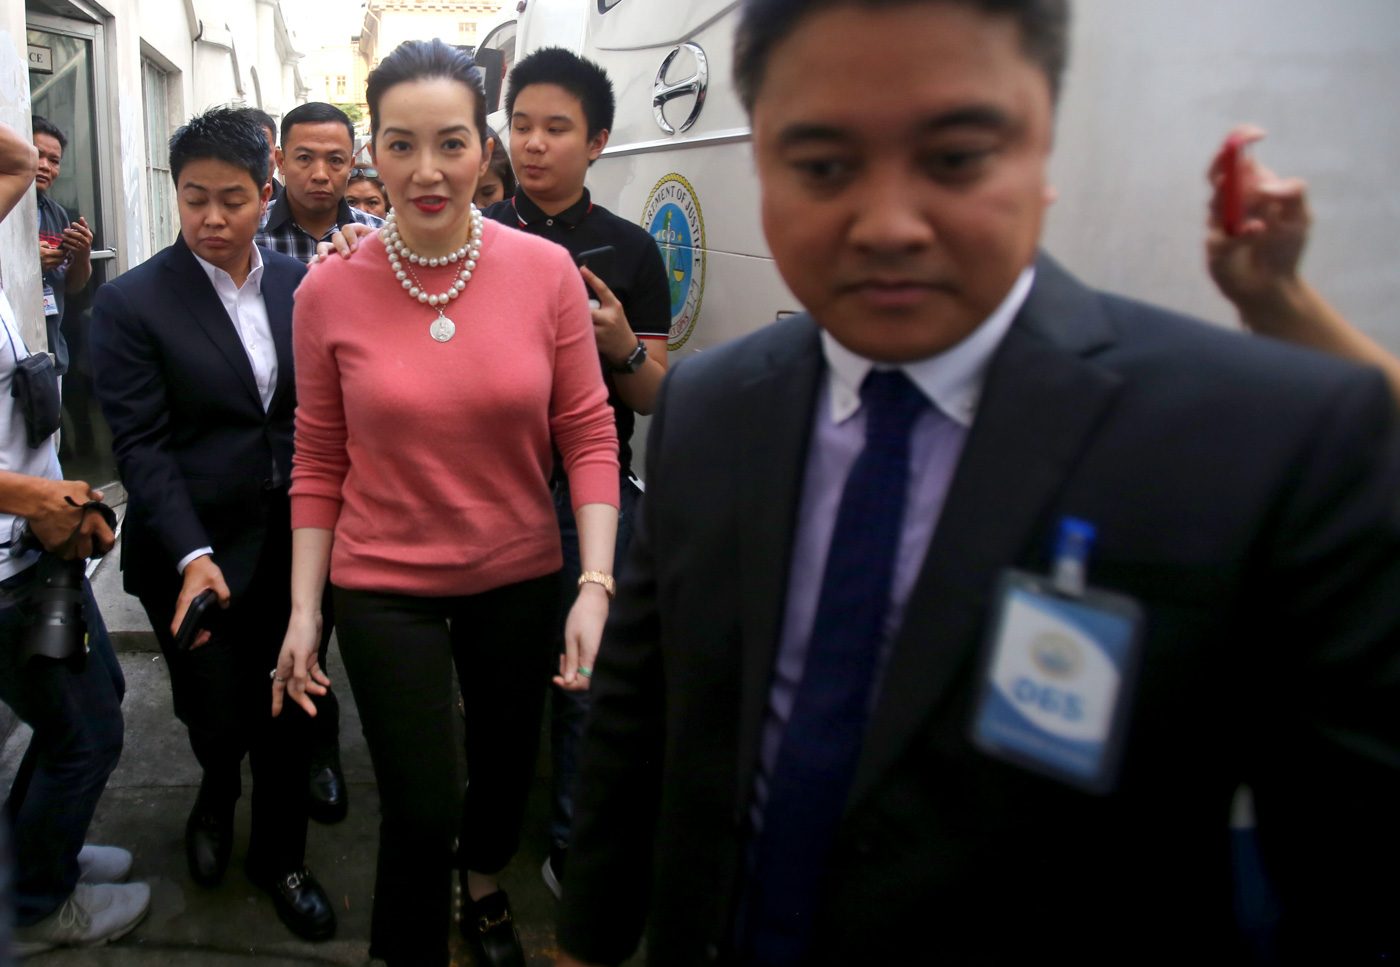 Kris Aquino and Nicko Falcis ‘settle financial issues’ and ‘work out personal differences’